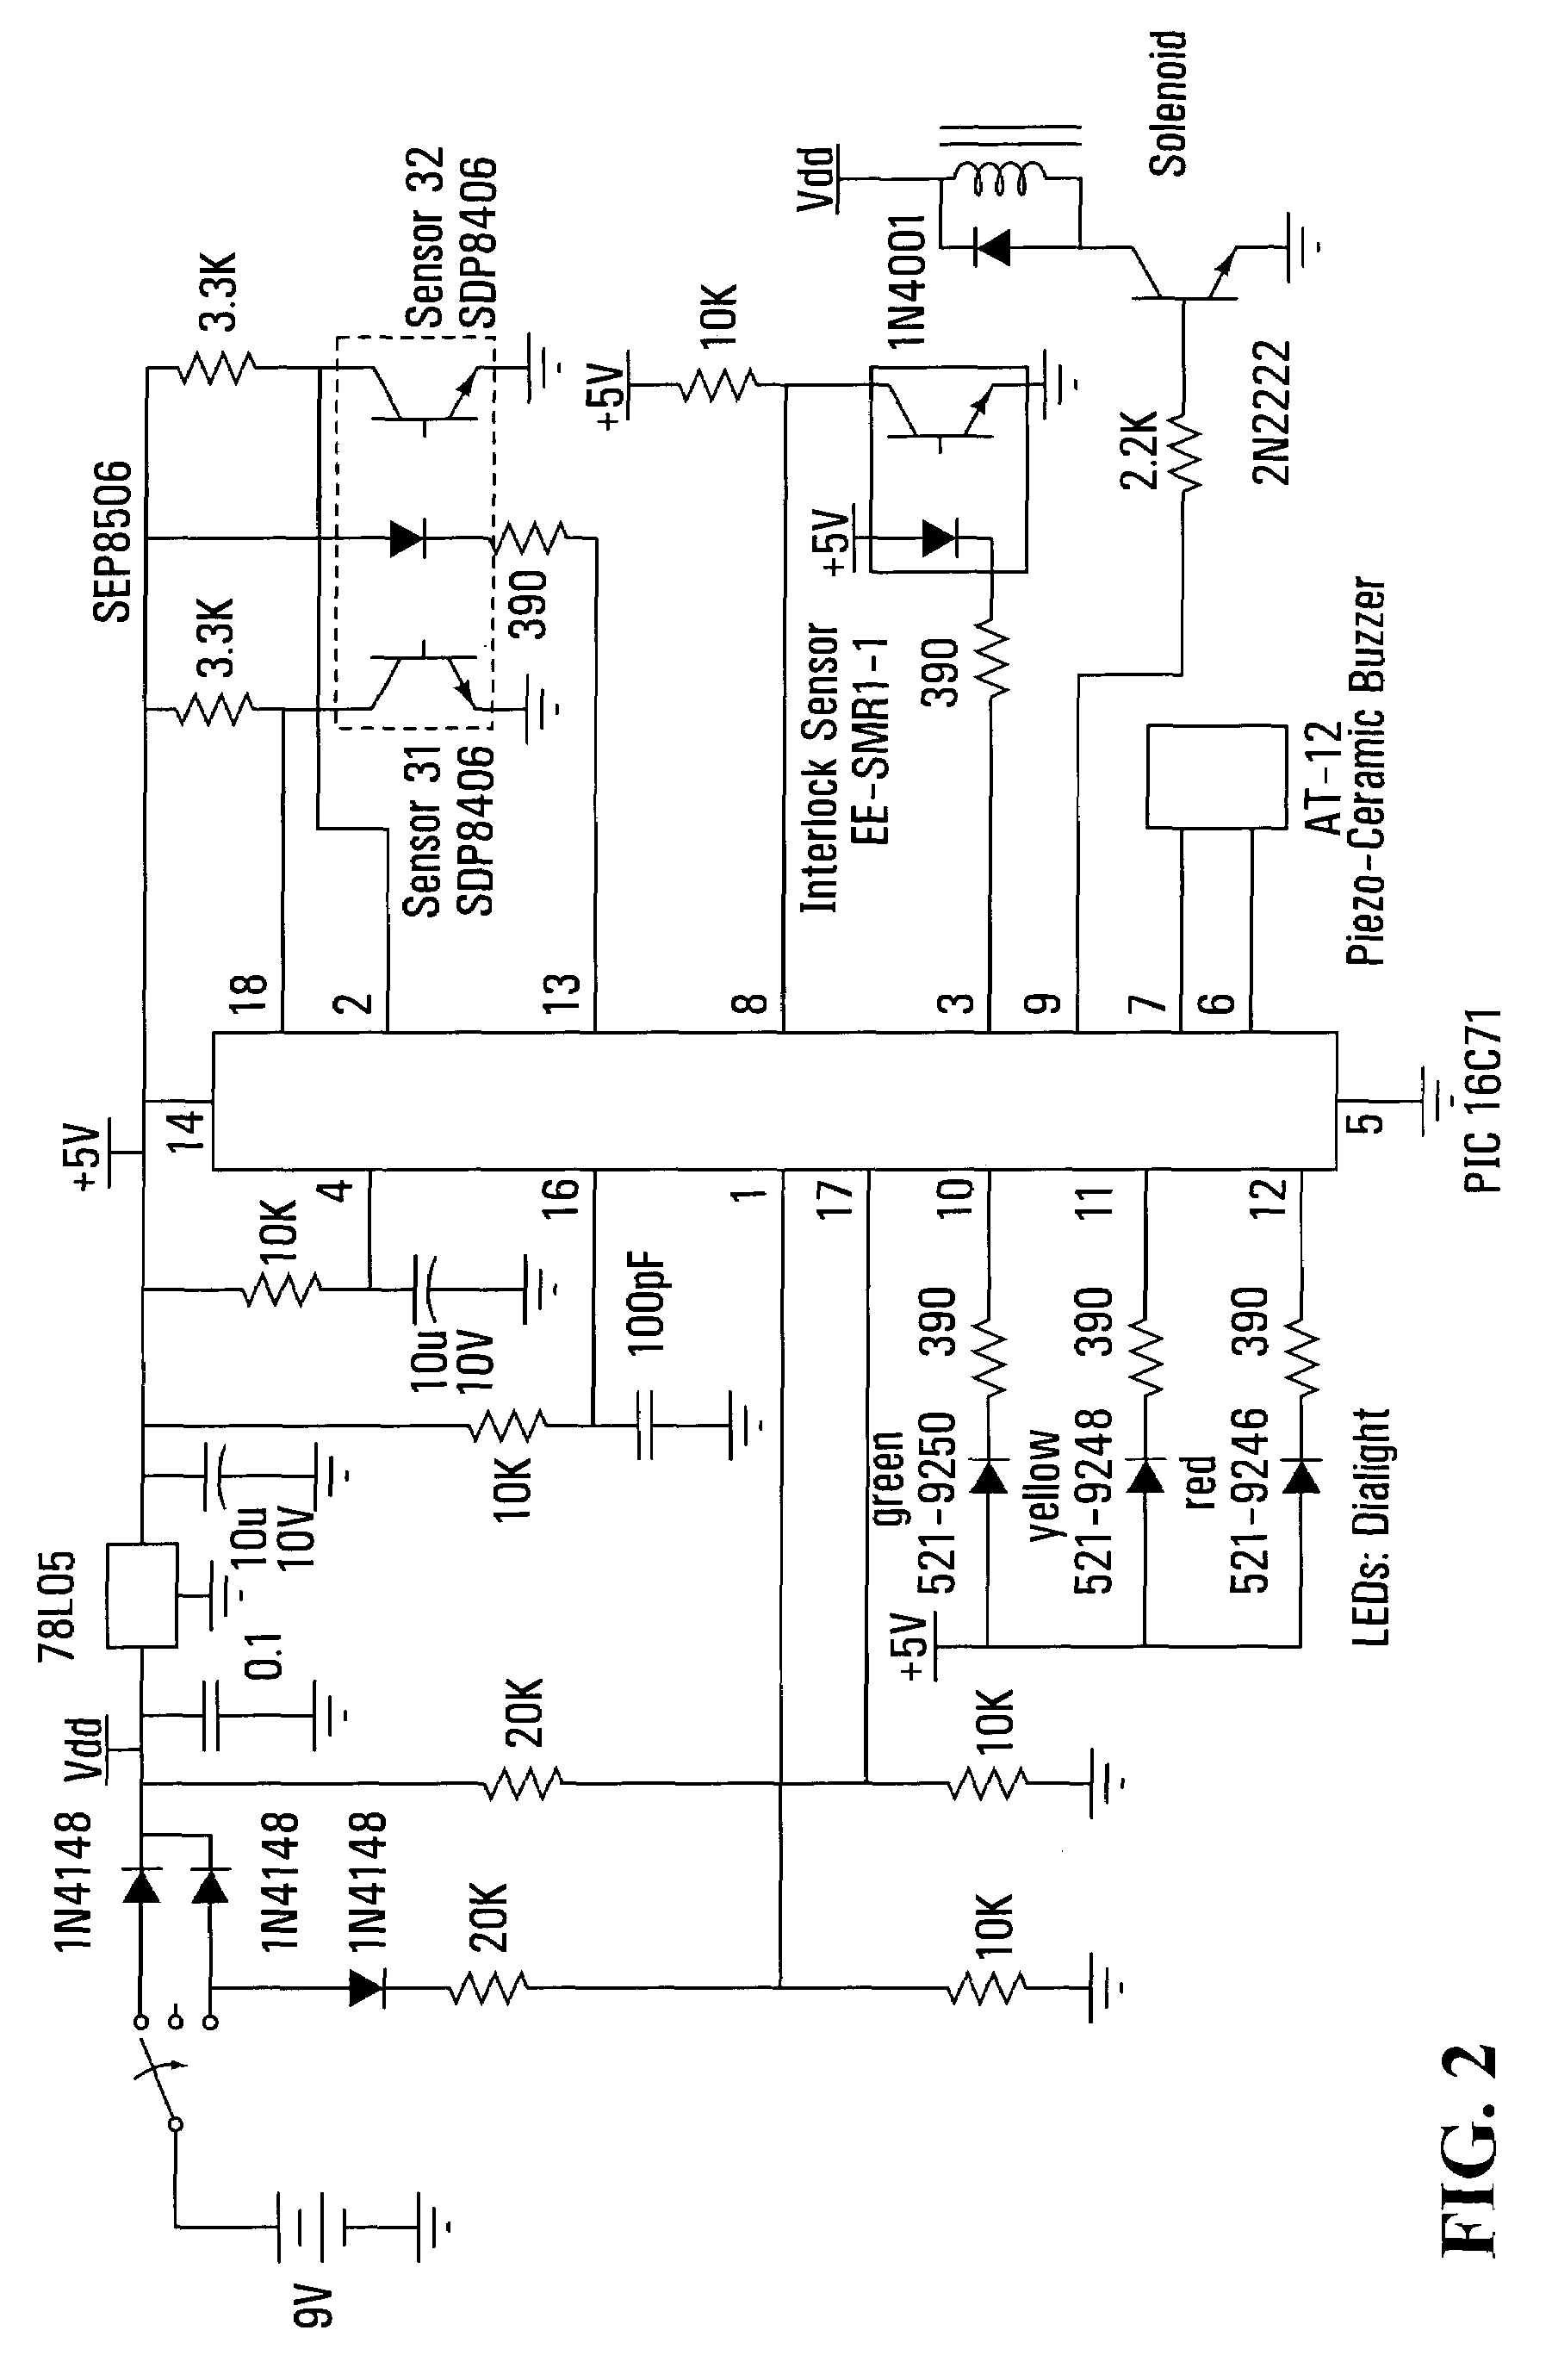 Fluid monitoring device